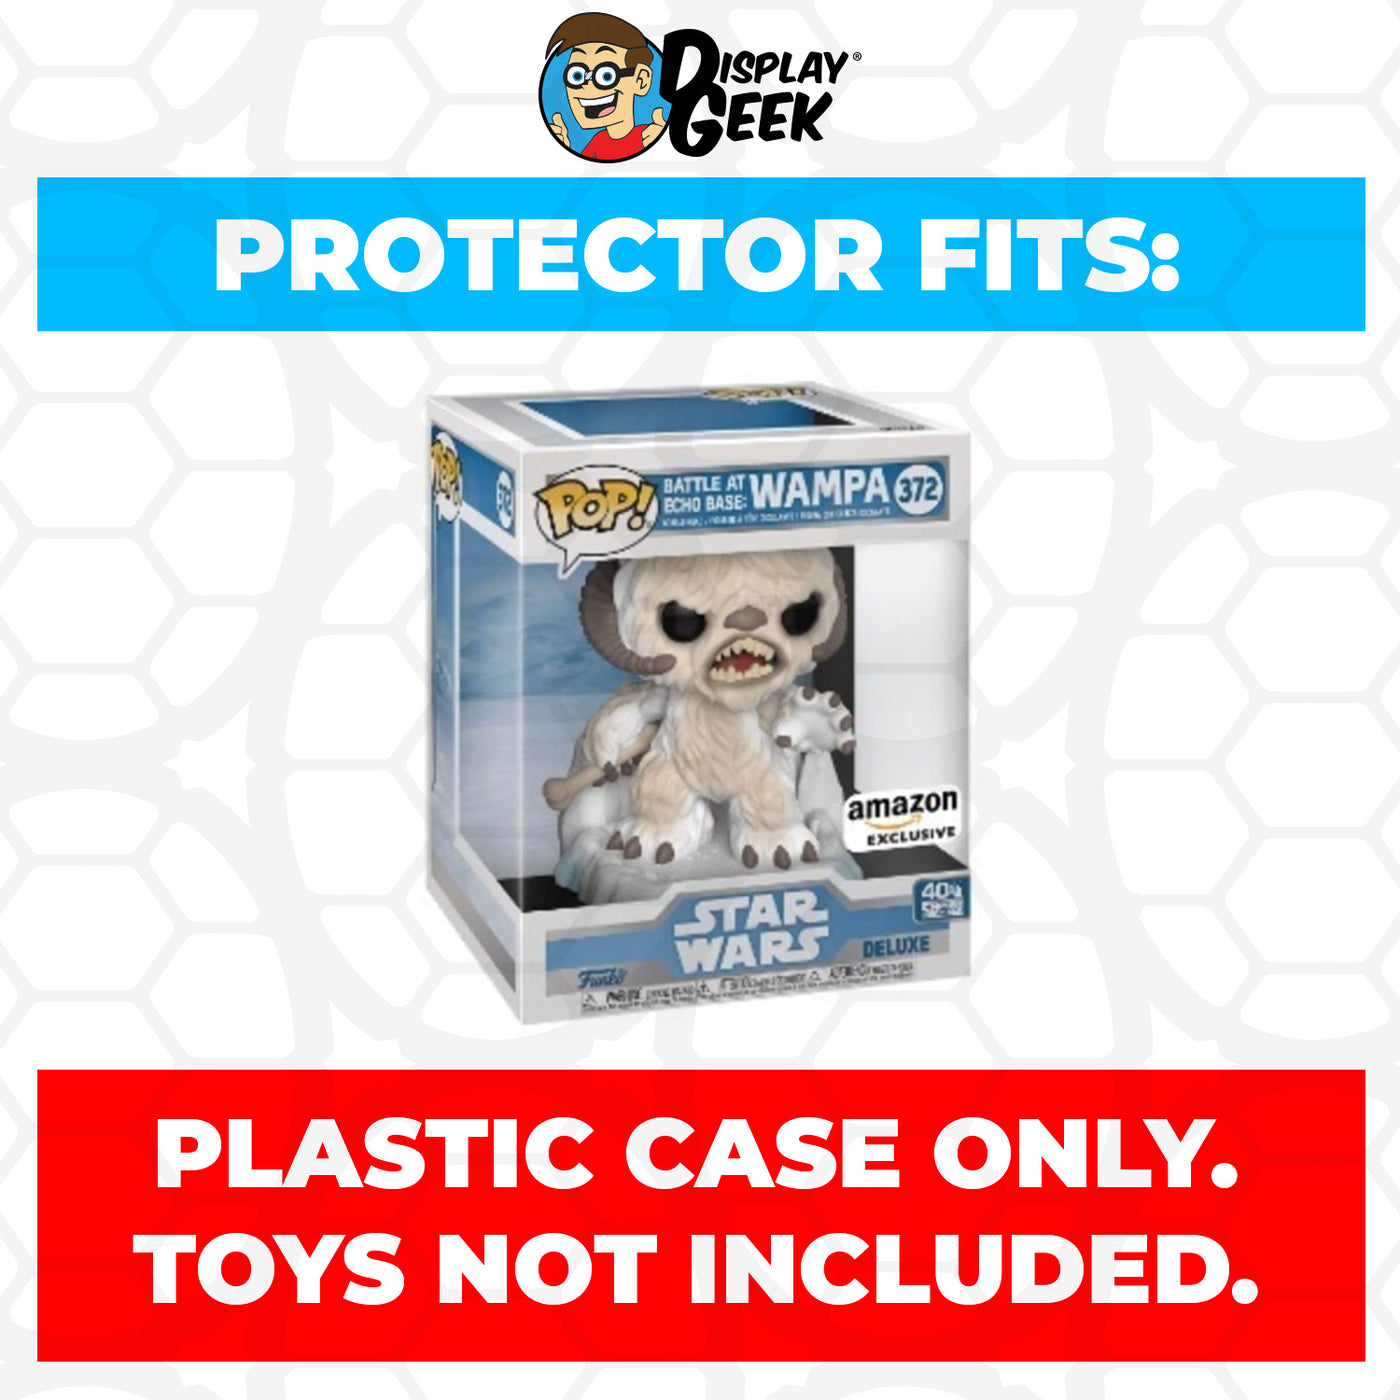 Pop Protector for Battle at Echo Base Wampa #372 Funko Pop Deluxe on The Protector Guide App by Display Geek